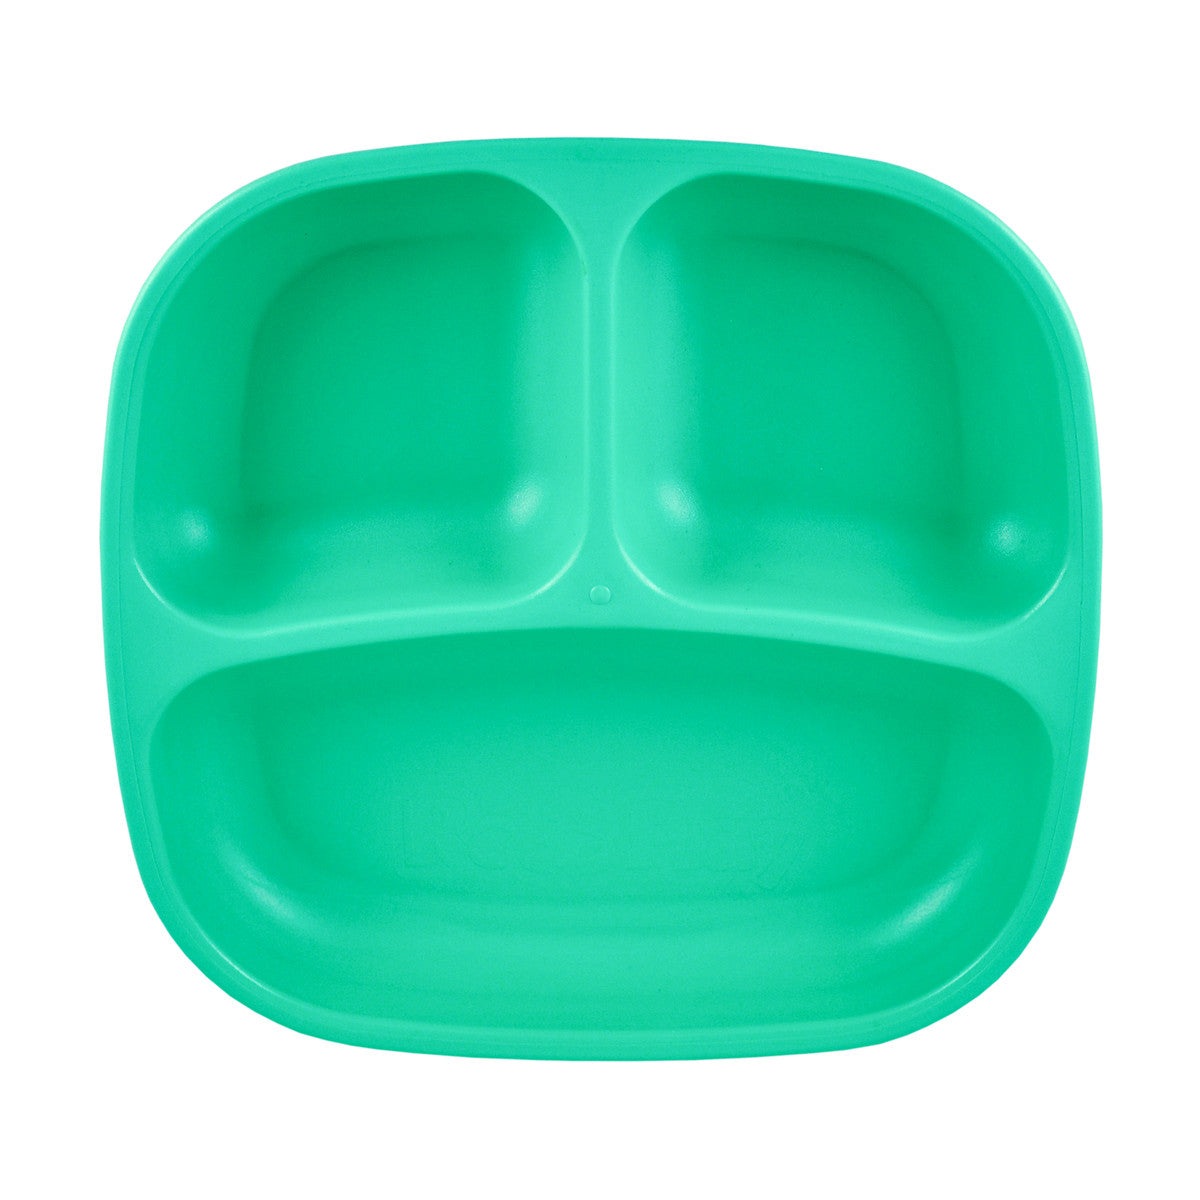 Green divided plate – oogaa